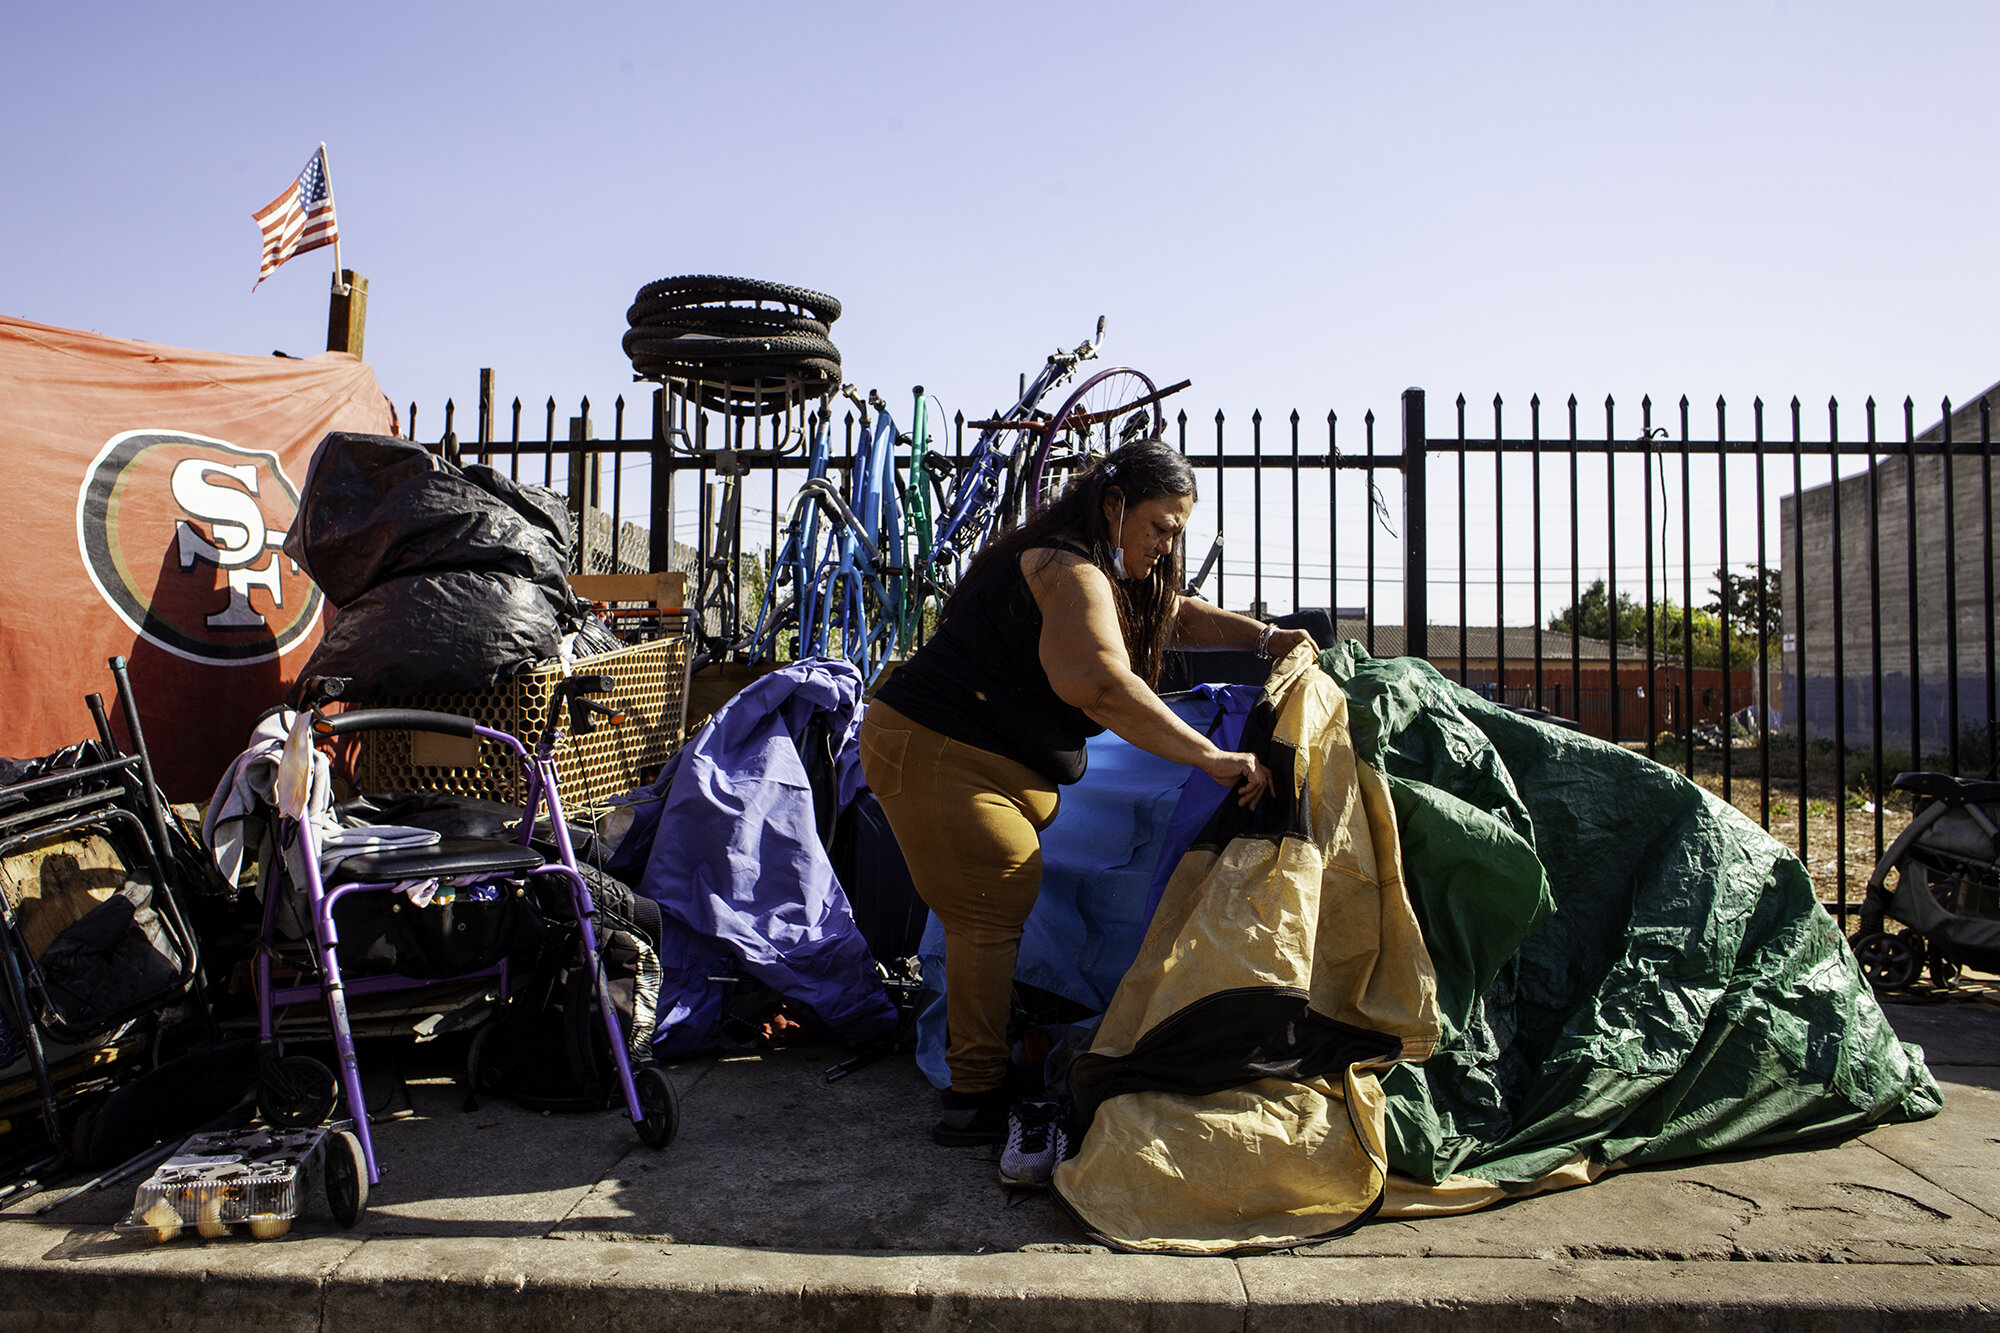  Aurilia Guzmán arranges her “little tent,” as she calls it, in Chinatown in Salinas, Calif. on Oct. 26, 2020. She and others had to leave before a city cleanup to address sanitation issues. 